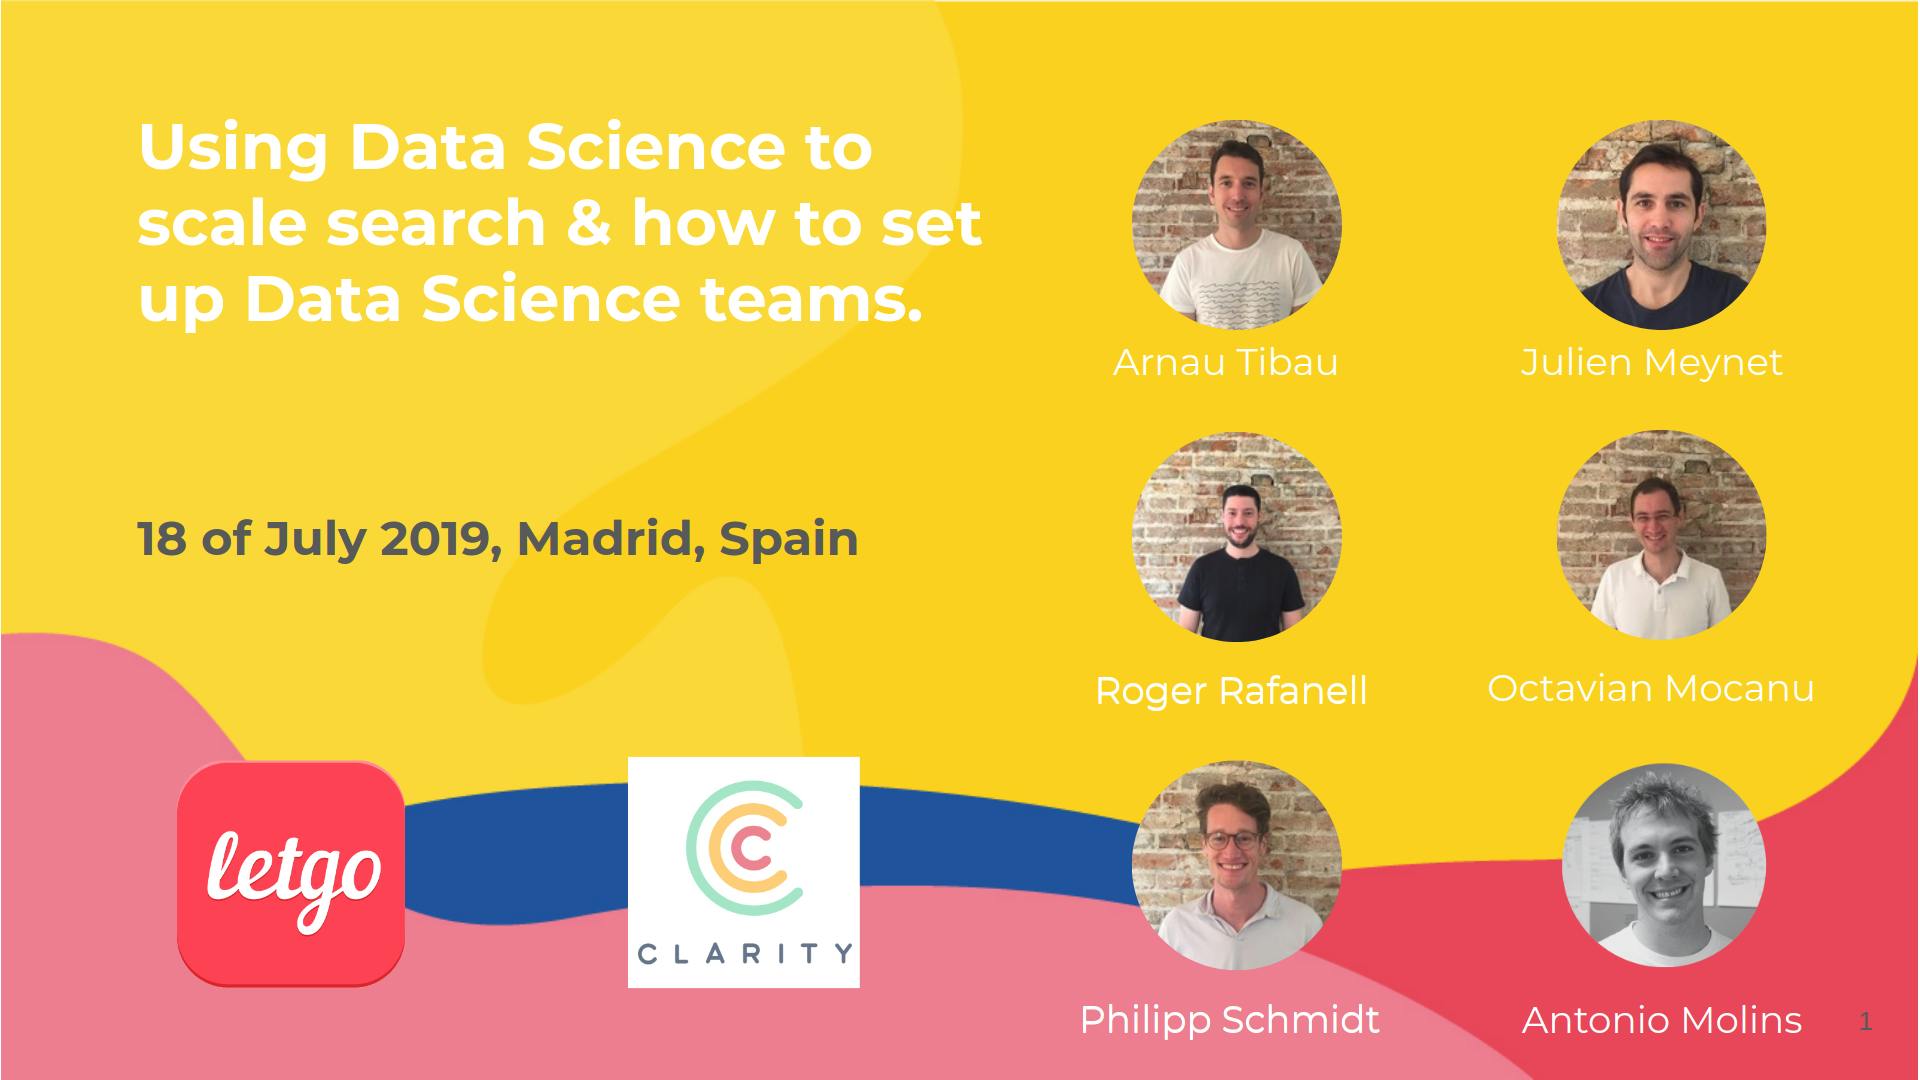 Using Data Science to scale search & how to set up Data Science teams